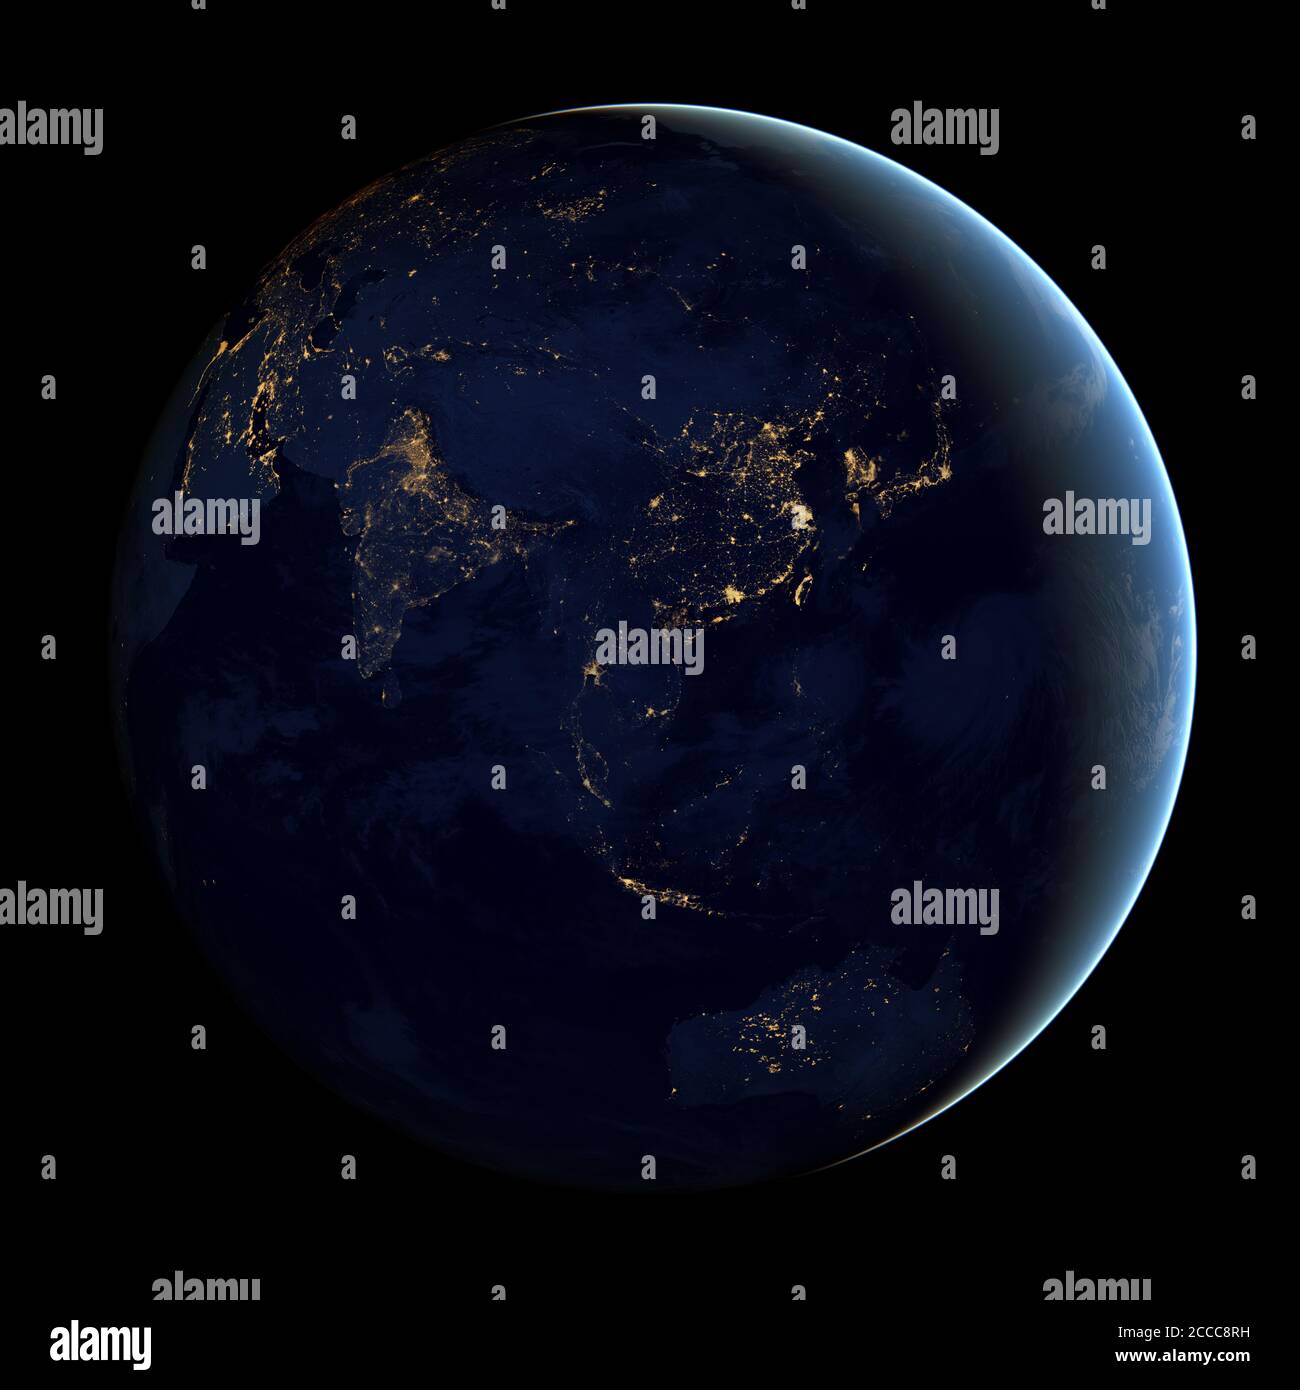 This composite image - made from NASA satellite data - shows the Far Eastern Hemisphere of the Earth at night - Photo: Geopix/NASA/Alamy Stock Photo Stock Photo